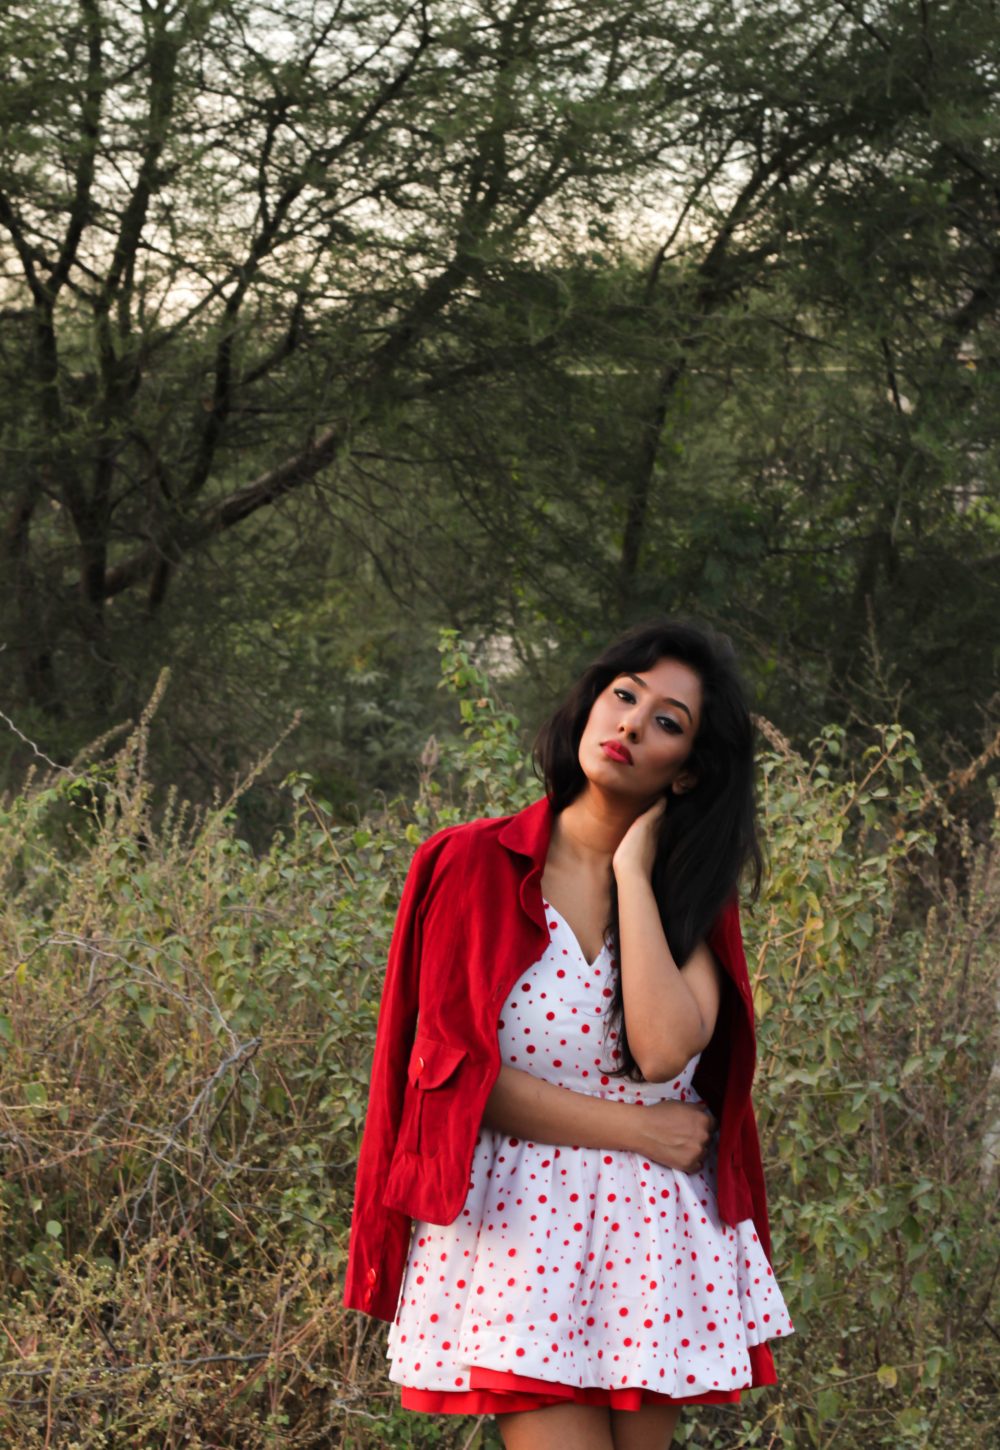  Lookbook ; Christmas post ; Christmas outfit ; Dusk ; Conceptual ; fashion photography ; Sunset ; Red Jacket ; Red Dress ; White Dress ; Dark ; Naznin ; hyderabad fashion bloggers ; hyderabad bloggers ; hyderabad fashion blogger ; I Dress for the Applause ; 